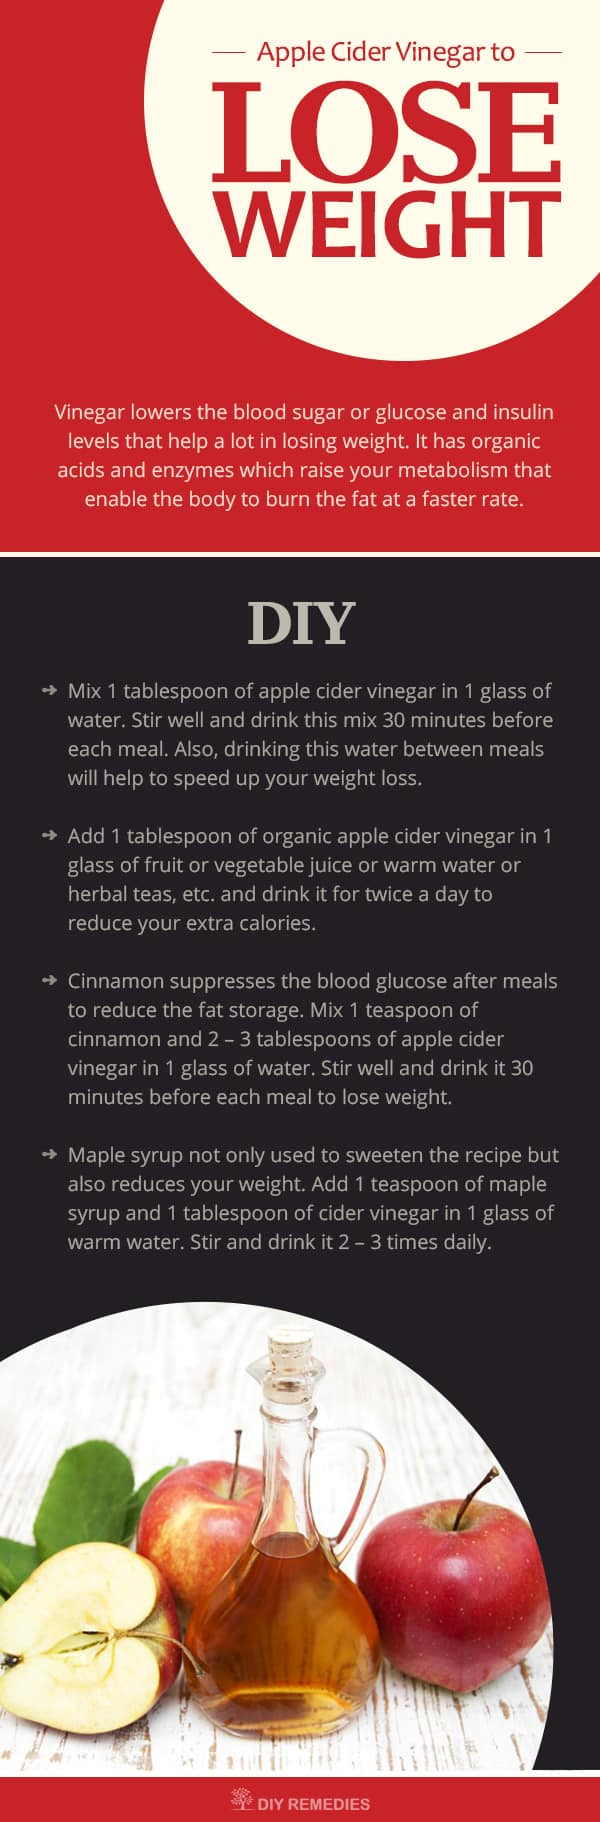 How to Lose Weight with Apple Cider Vinegar